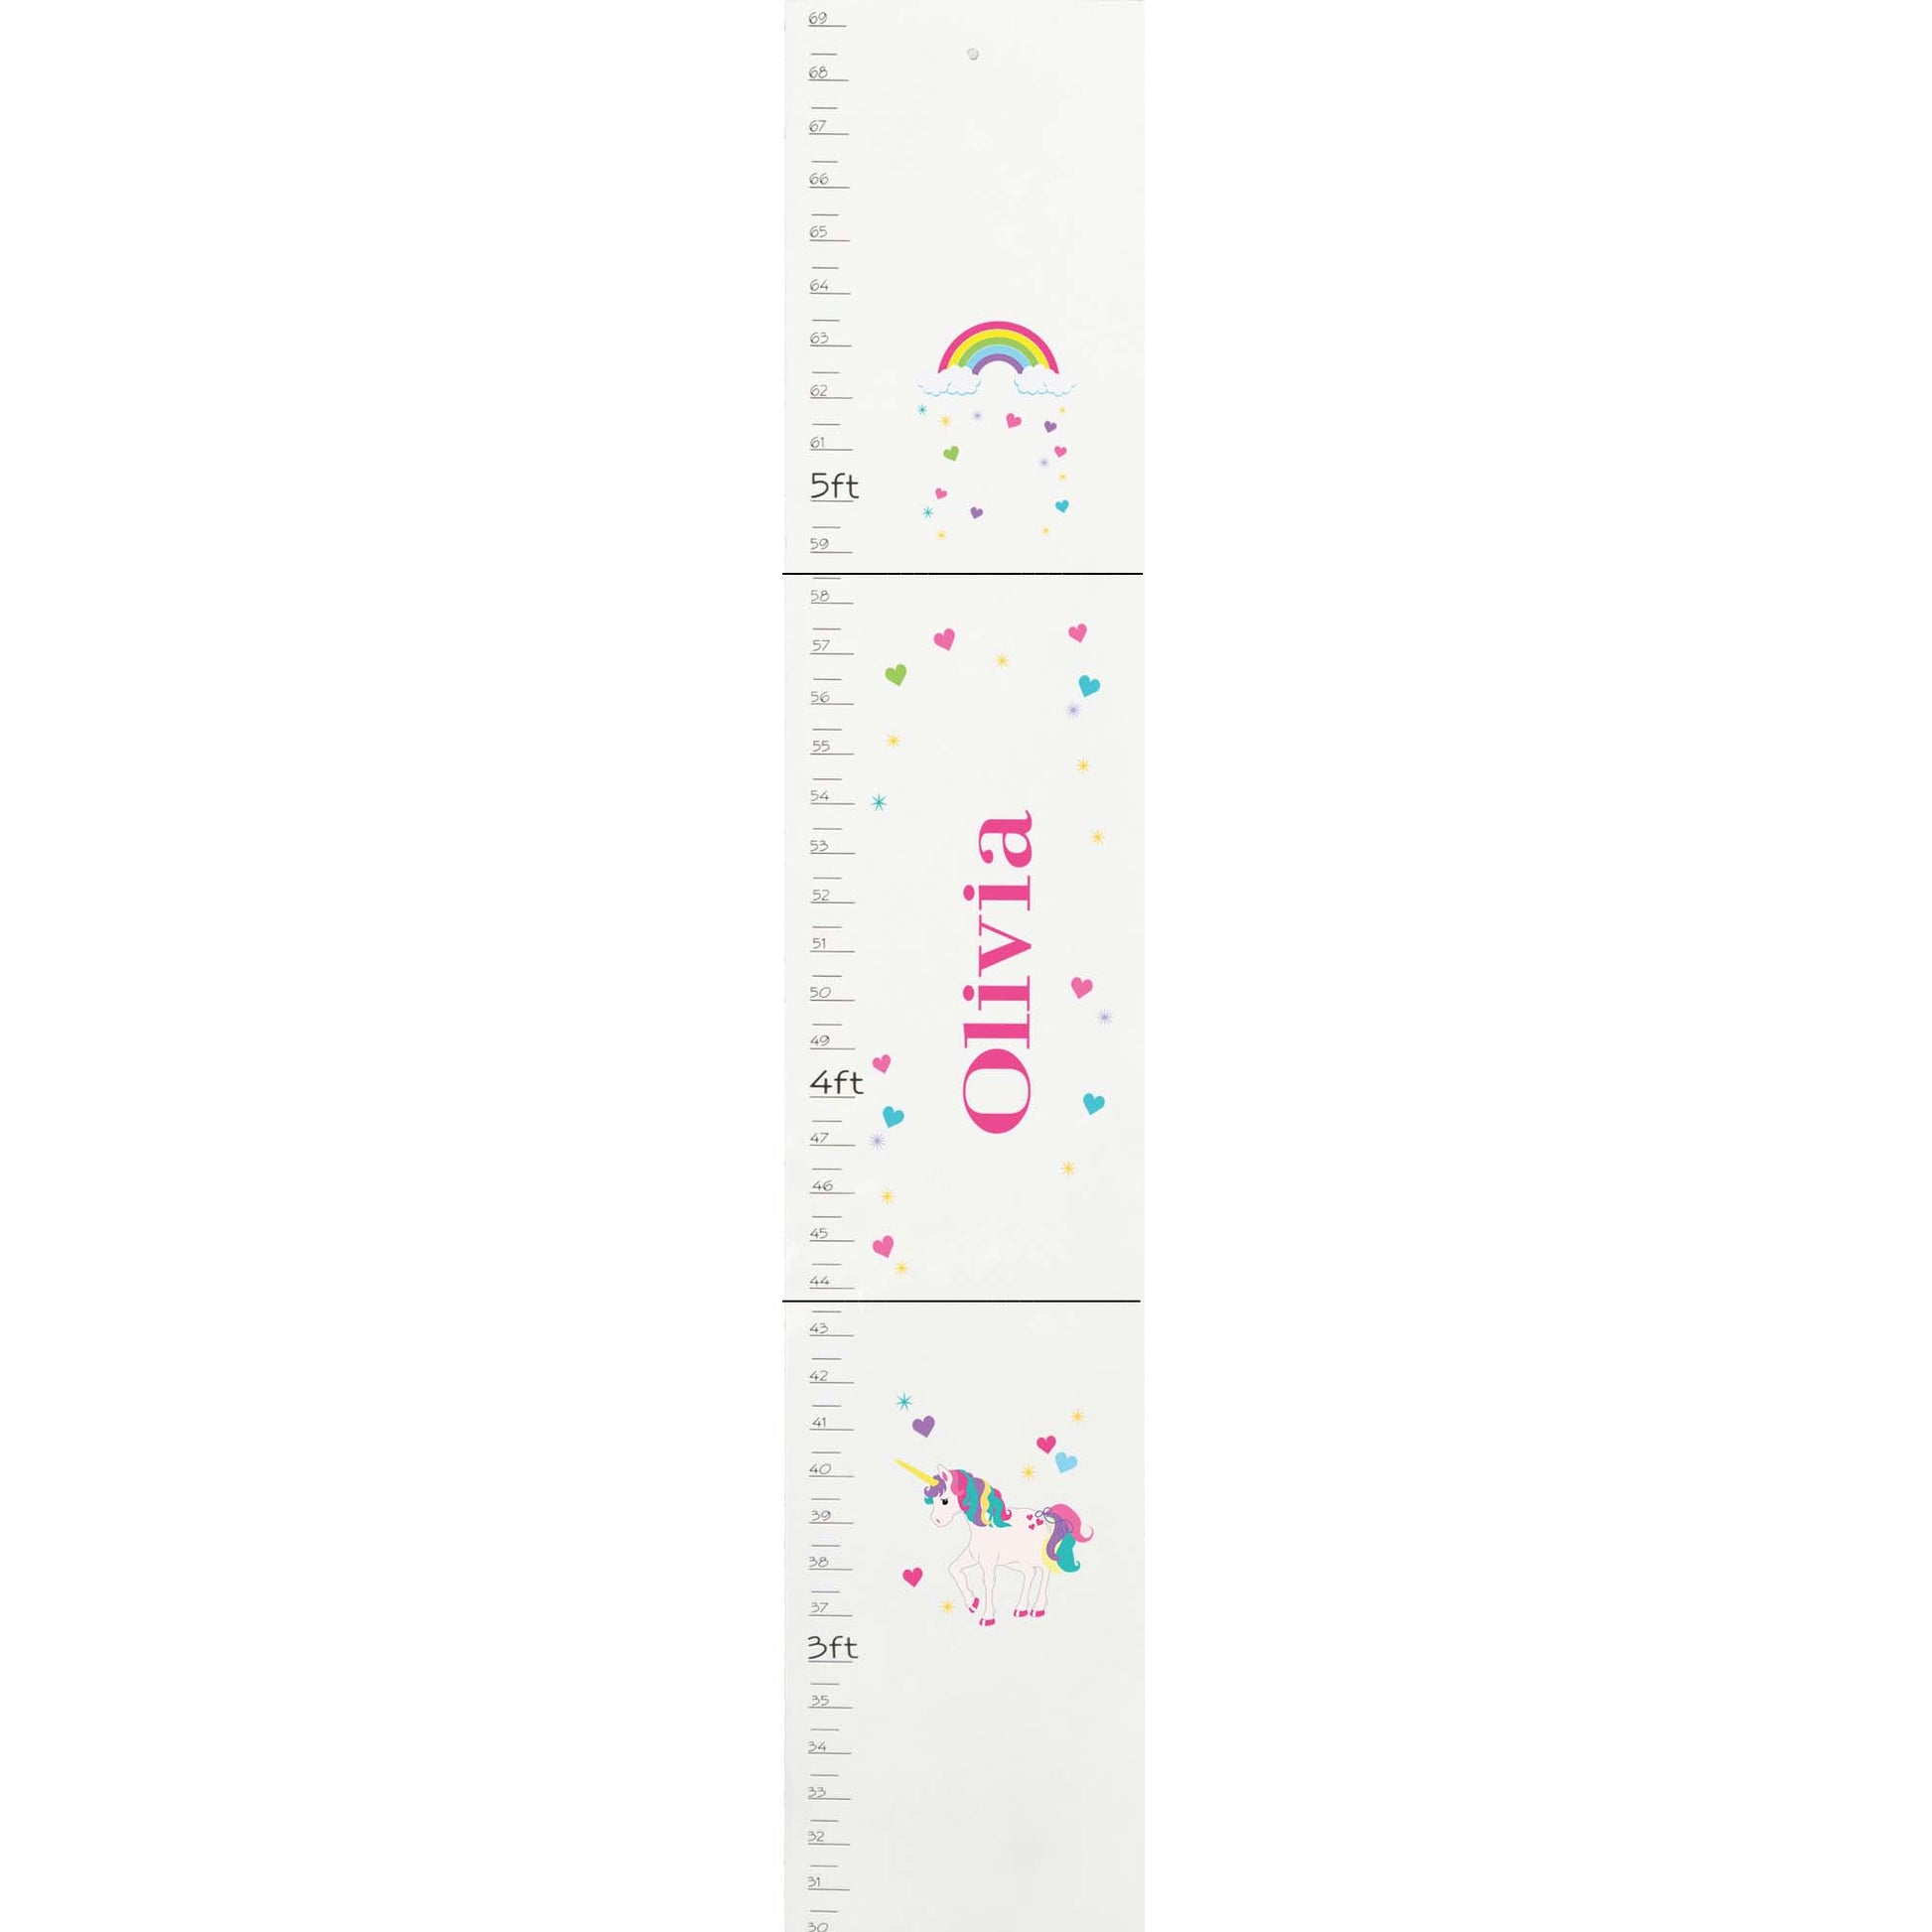 Personalized White Growth Chart With Pink Ladybug Design